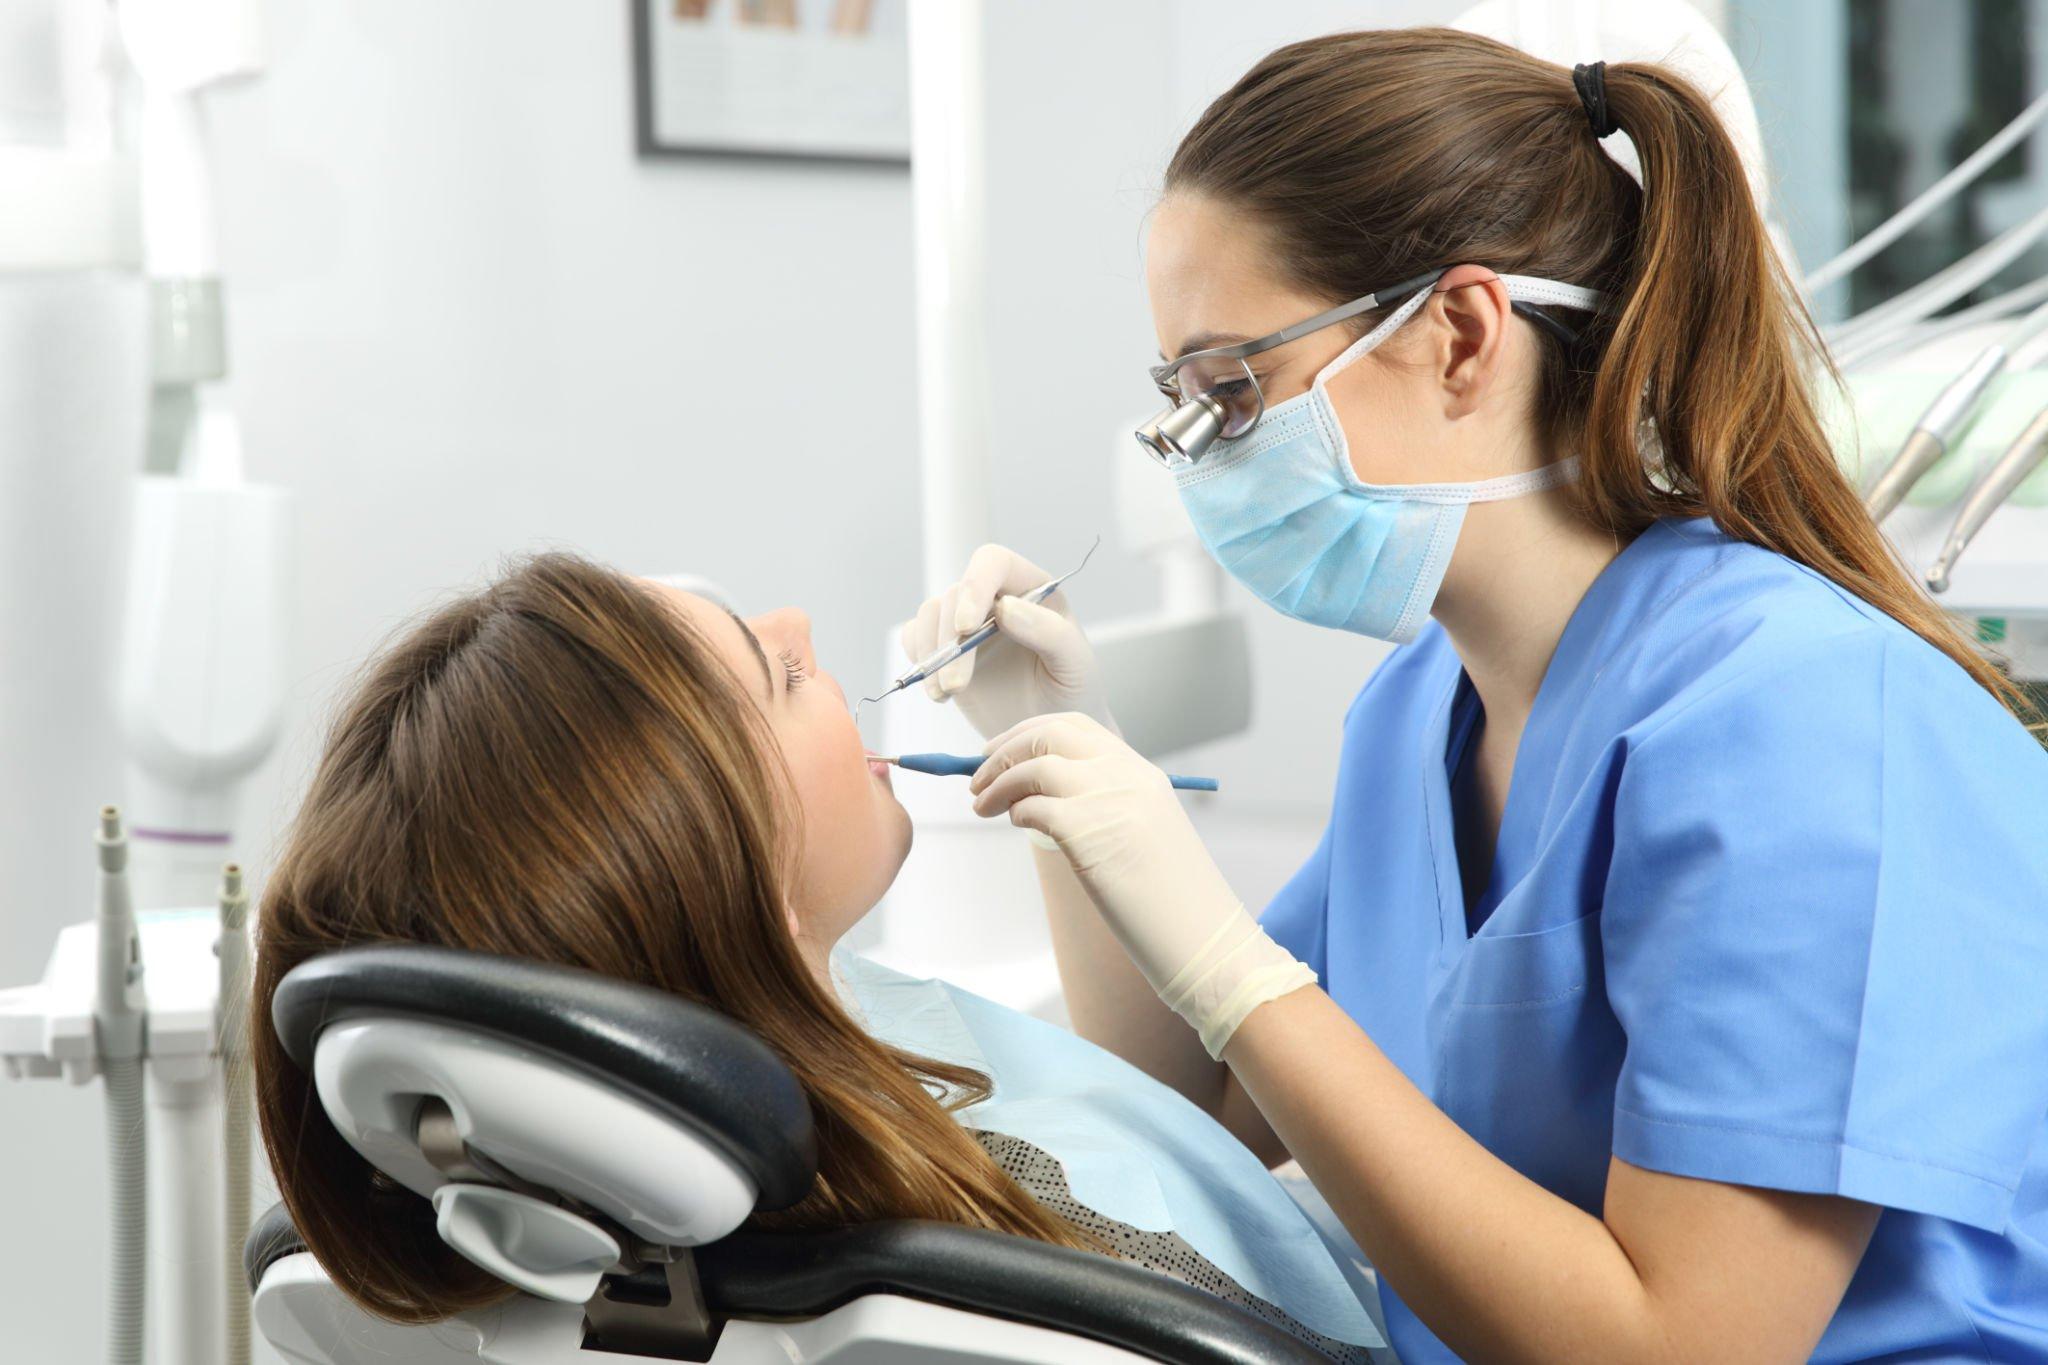 Worried About Choosing the Best Dentist in Hornsby? Consider These Factors While Choosing a Dentist